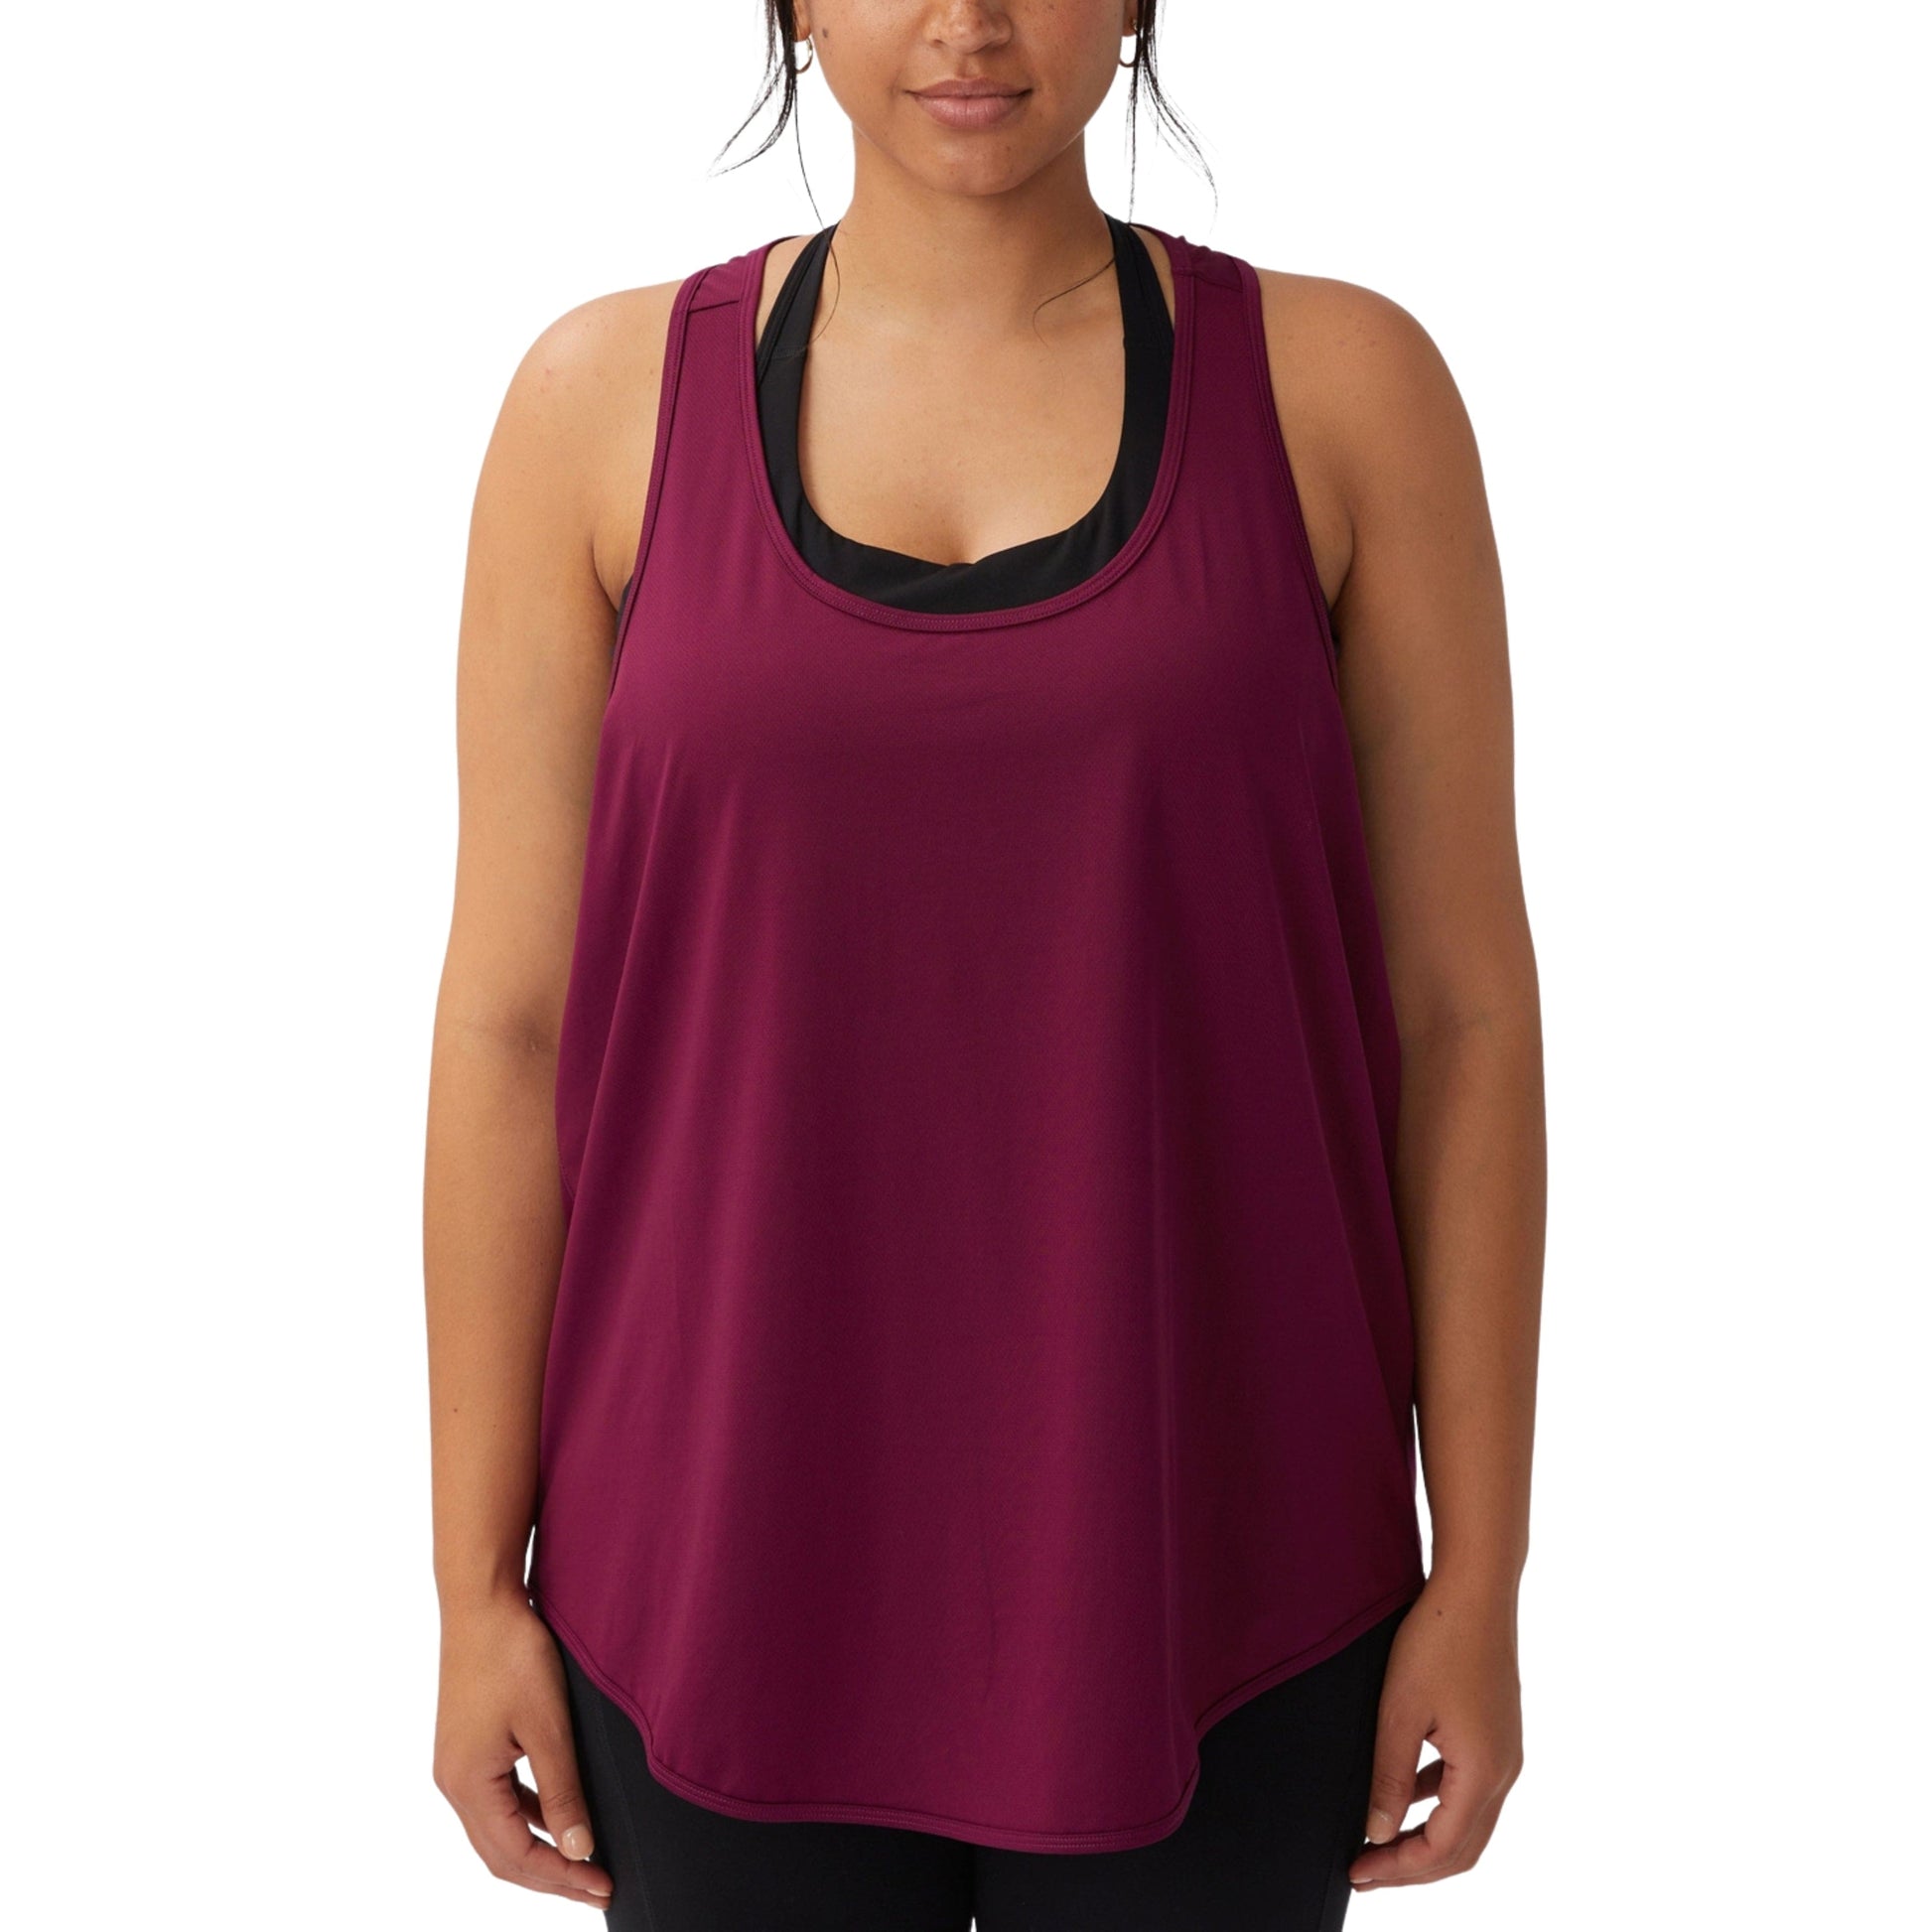 COTTON ON Womens sports COTTON ON - Trendy Plus Size Active Training Tank Top